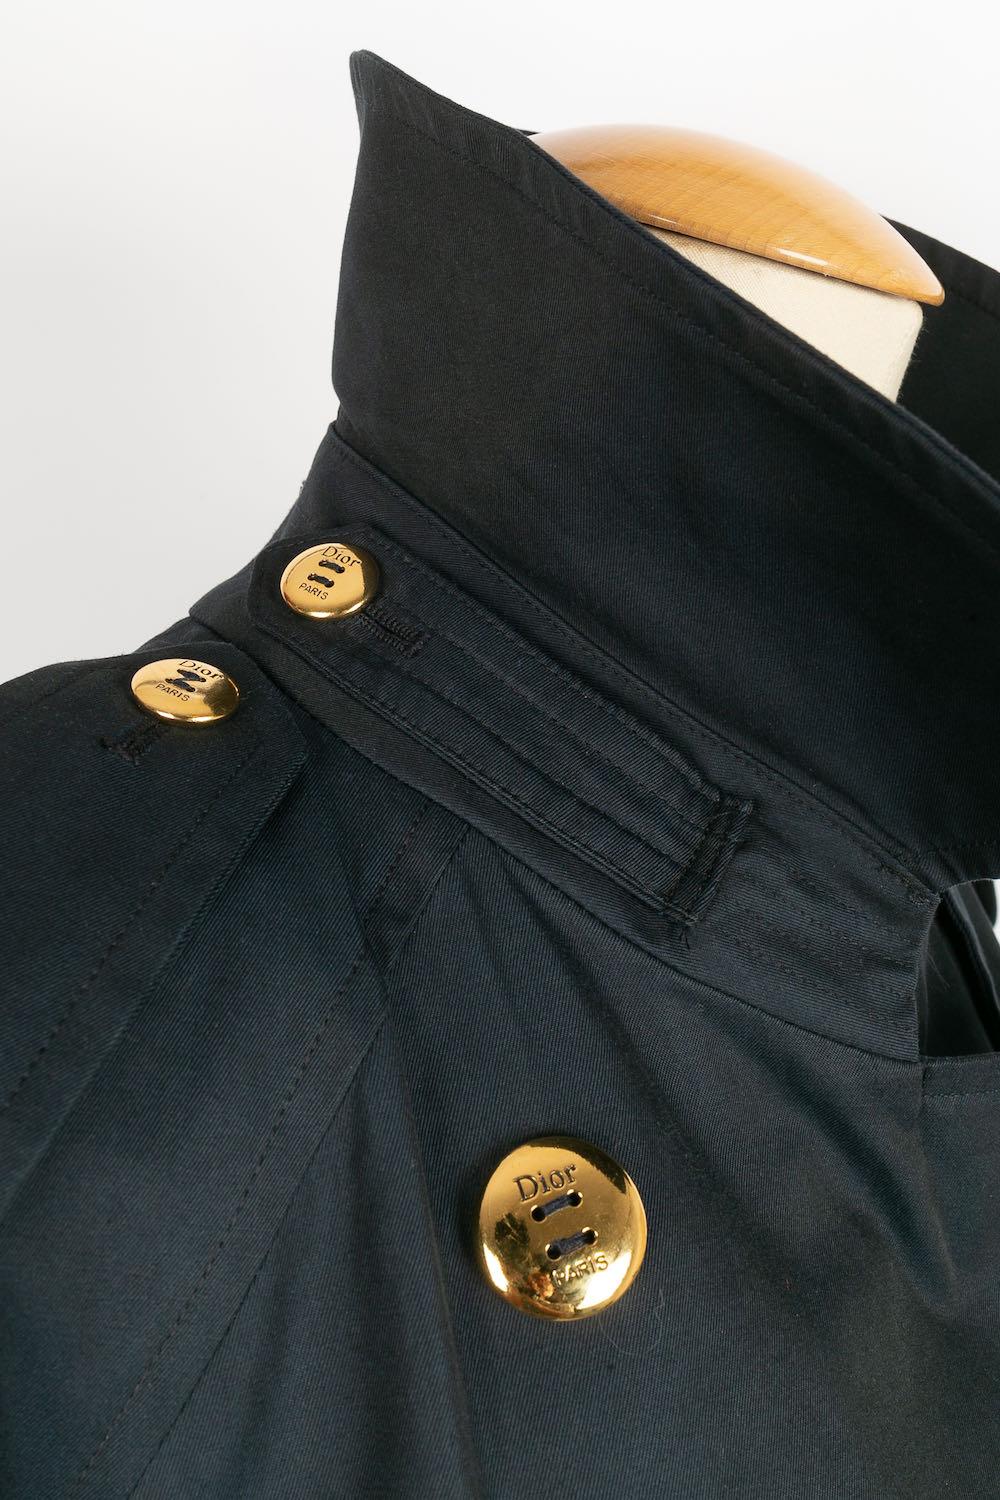 Christian Dior Navy Blue Trench Coat For Sale 1